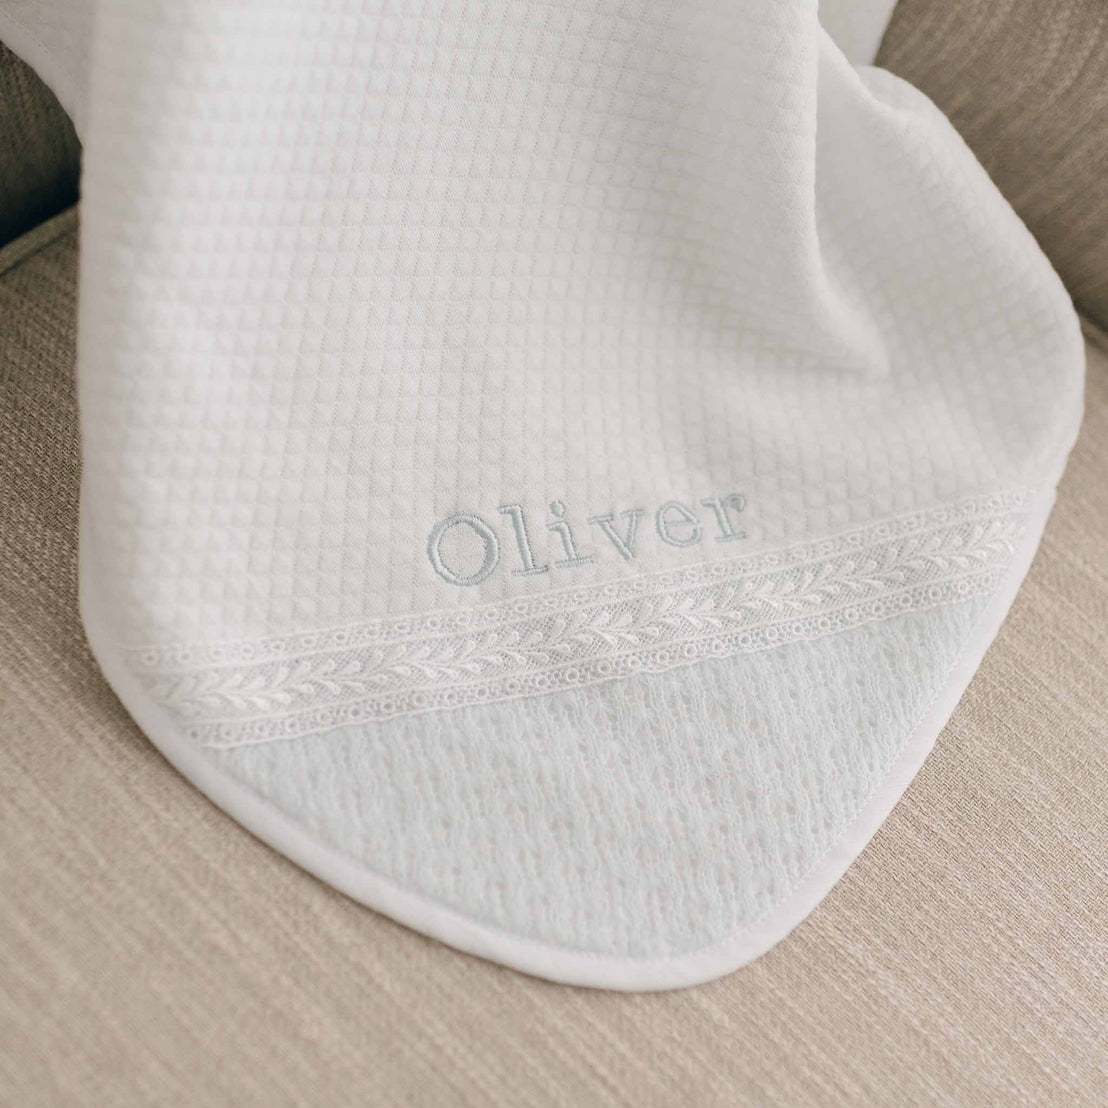 The white Oliver Personalized Blanket featuring the name "Oliver" embroidered in light blue thread is draped over a beige couch. The personalized blanket includes decorative lace trim near the embroidered name.